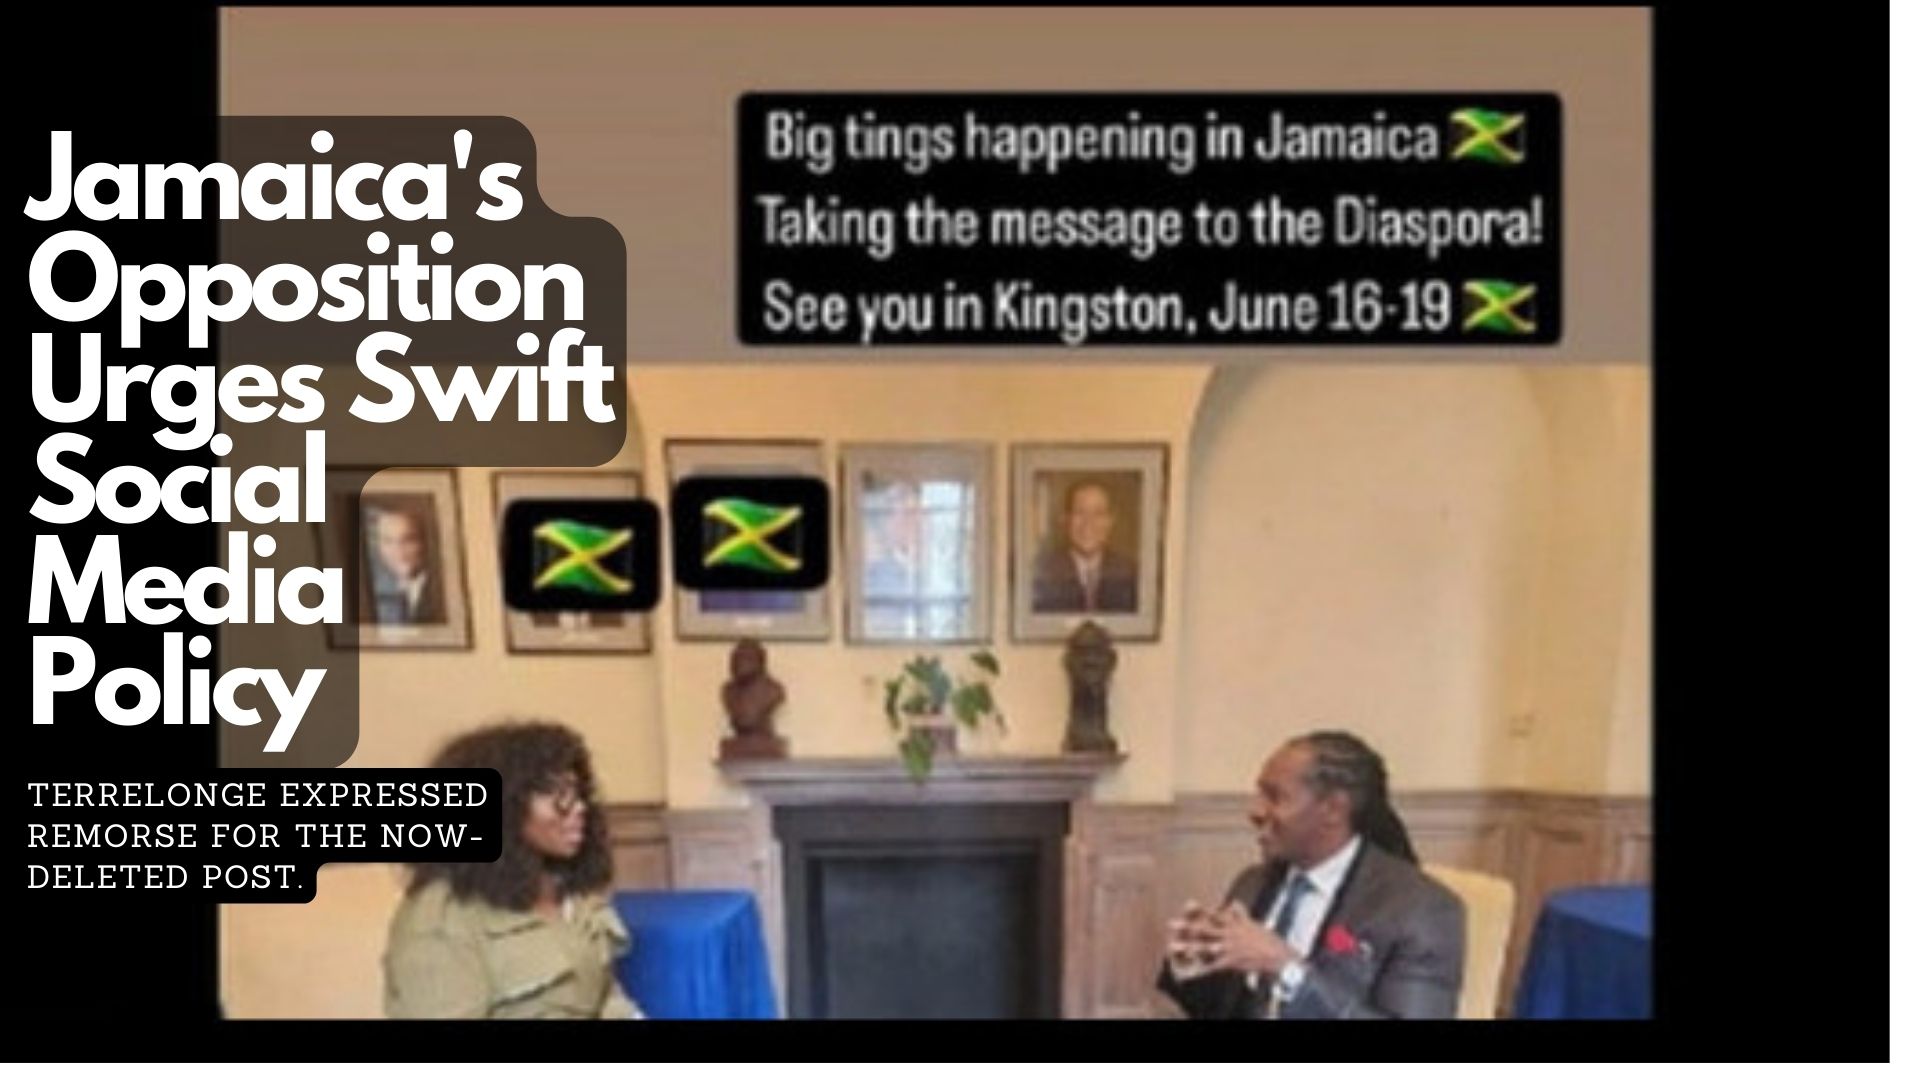 Jamaica's Opposition Urges Swift Social Media Policy